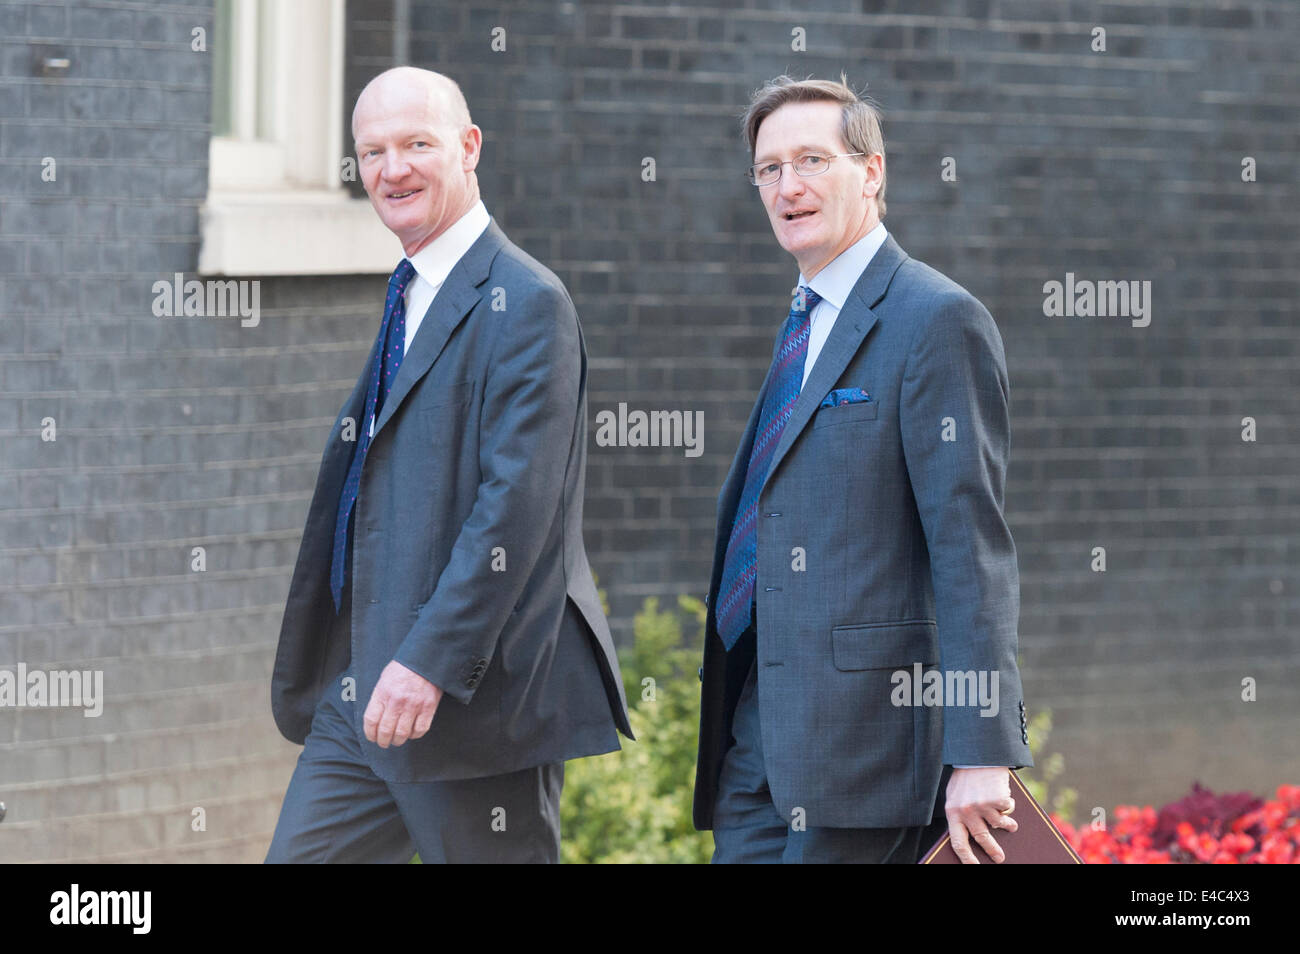 Downing Street, London, UK. 8th July 2014. UK government ministers attend 10 Downing Street in London for the weekly Cabinet Meeting. Pictured L-R: DAVID WILLETTS MP -  Minister of State for Universities and Science; Dominic Grieve QC MP - Attorney General. Credit:  Lee Thomas/Alamy Live News Stock Photo